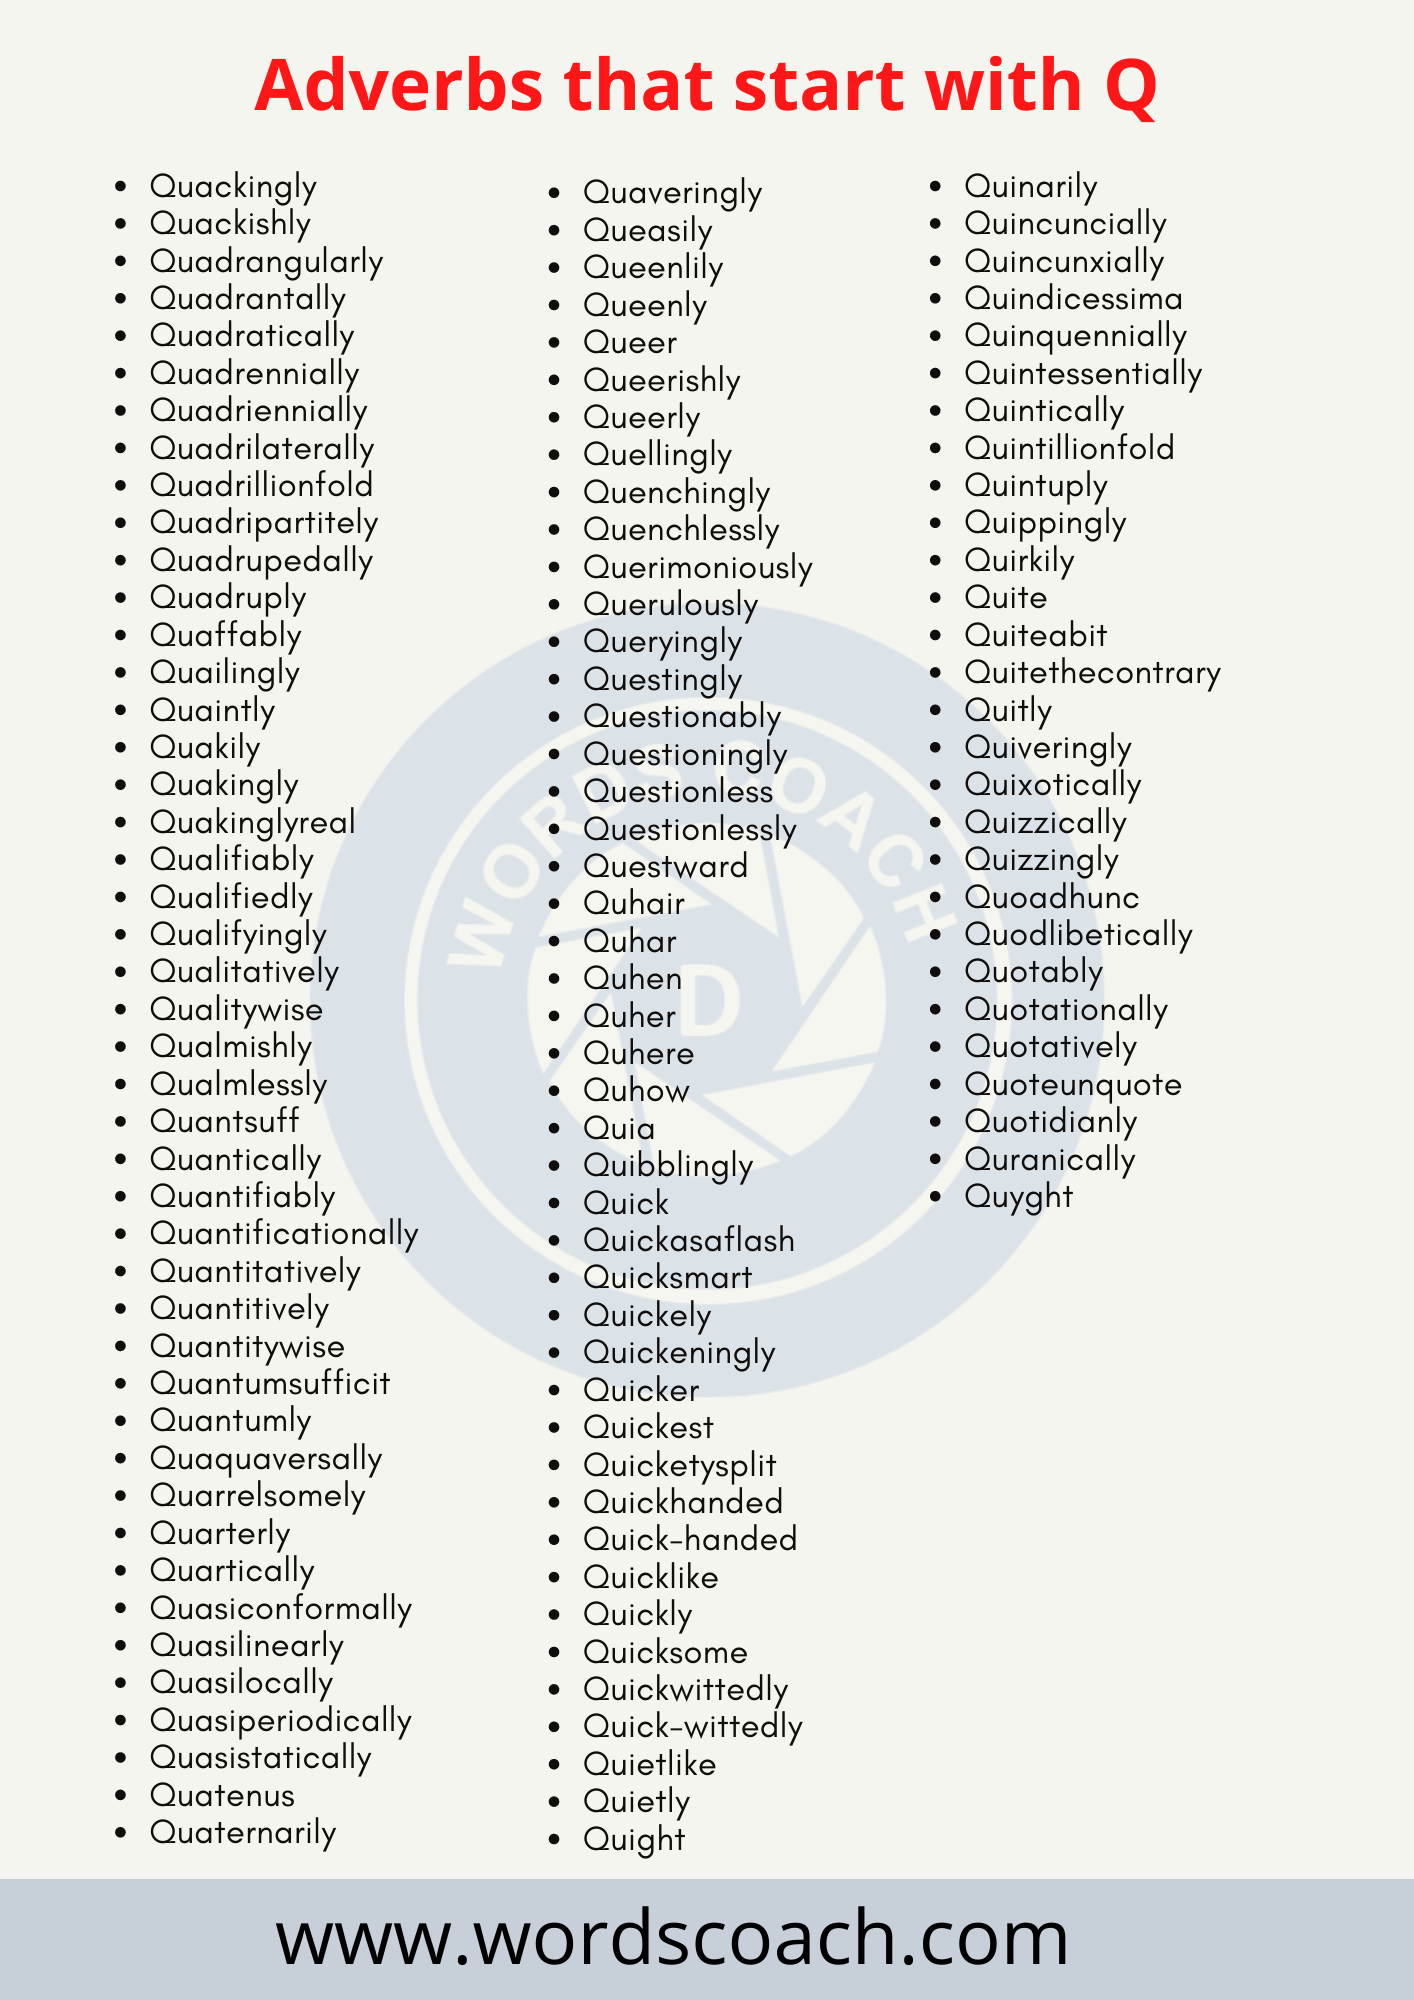 Adverbs that start with Q - wordscoach.com